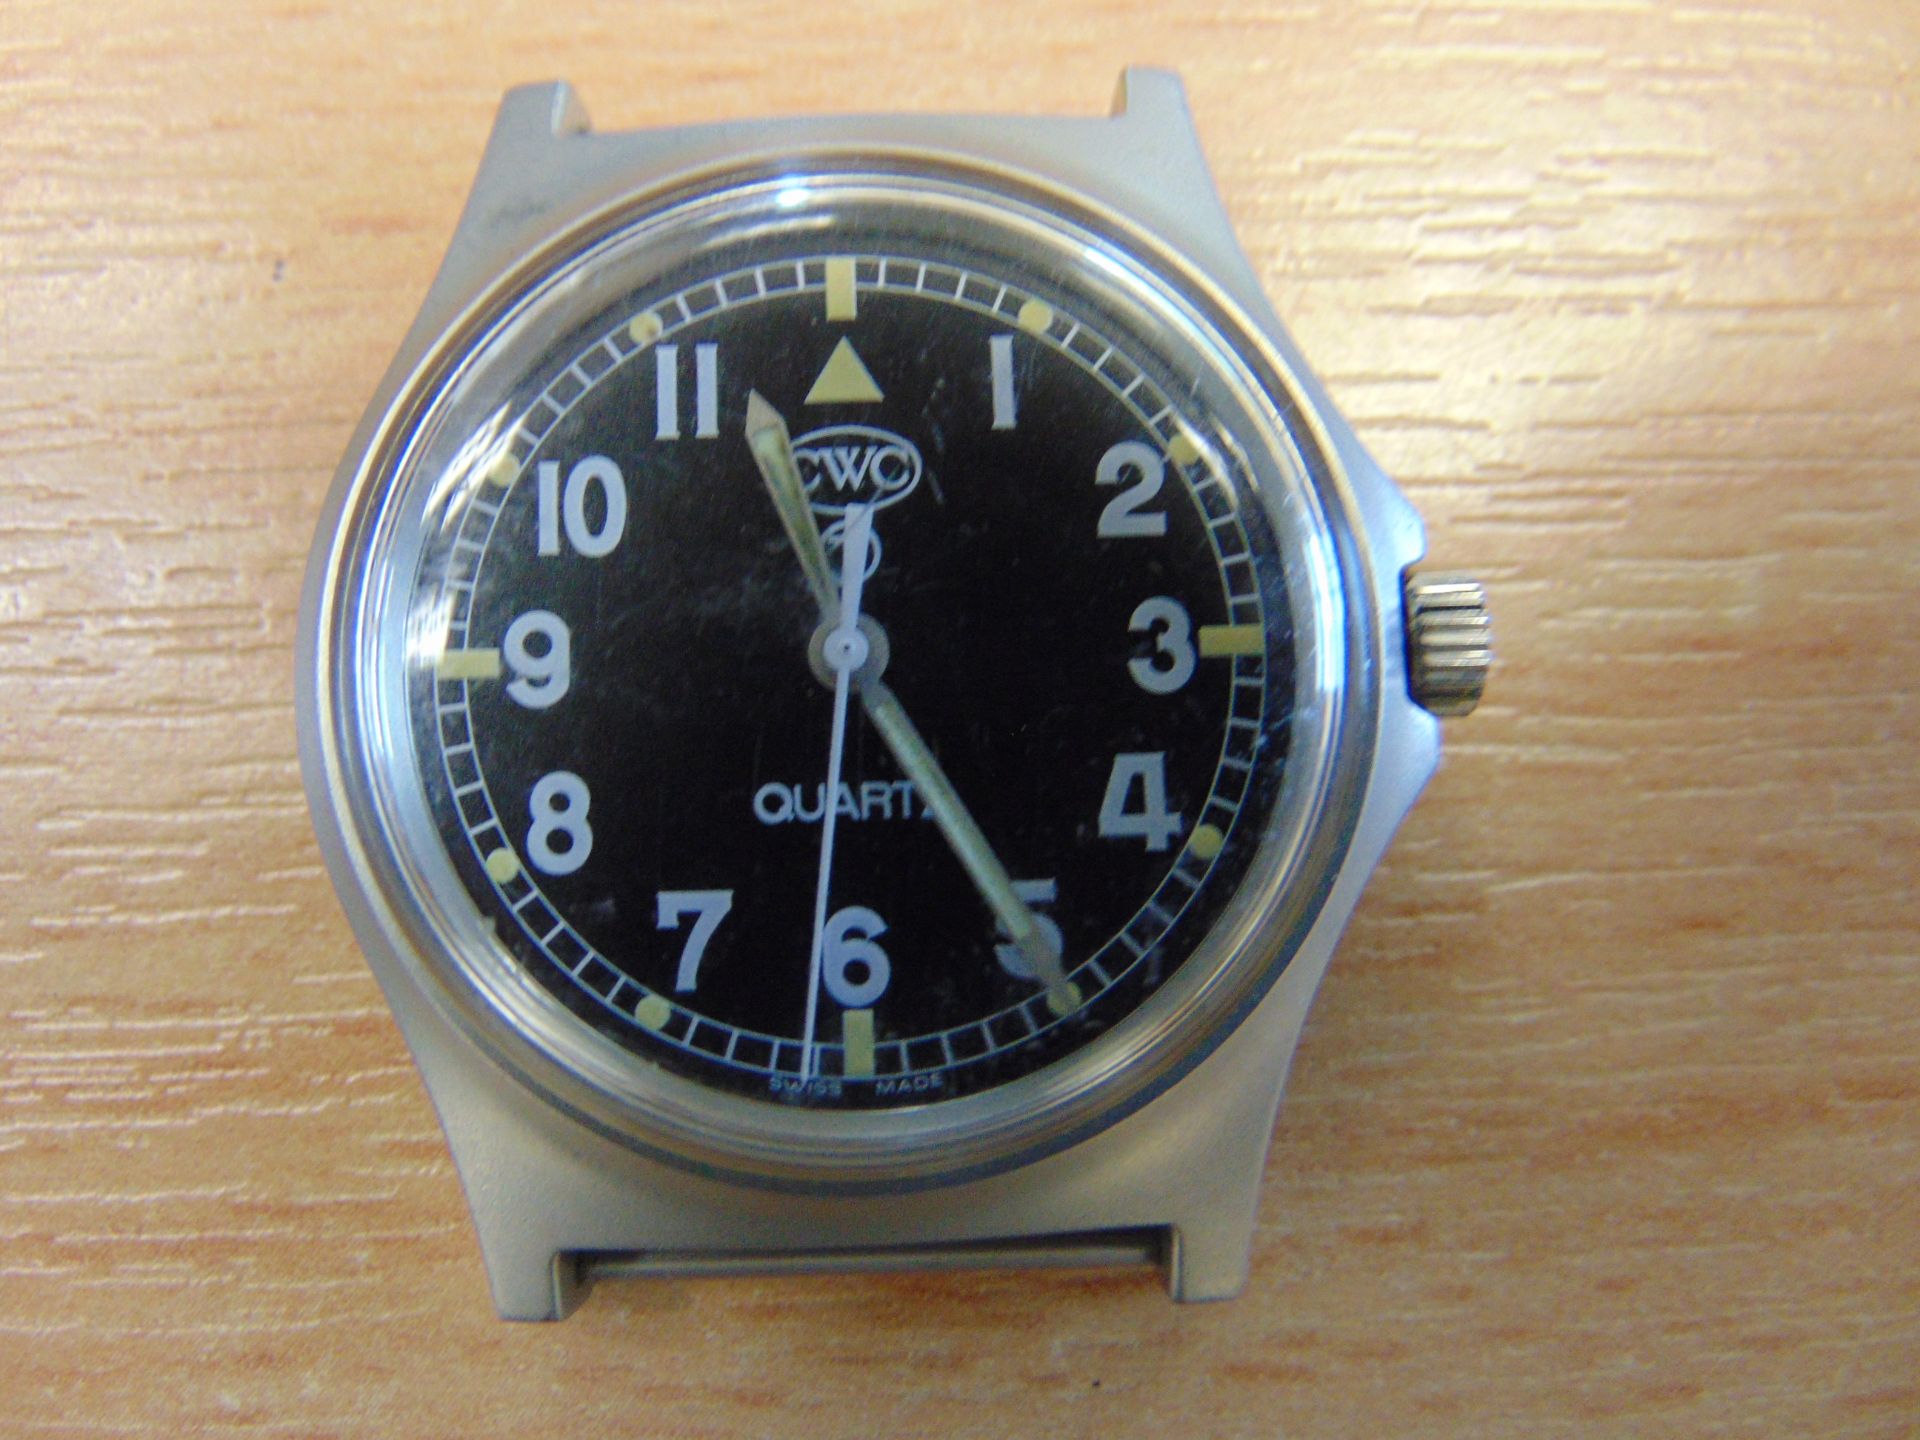 CWC (Cabot Watch Co Switzerland) British Army W10 Service Watch Nato Marks Water Resistant to 5ATM